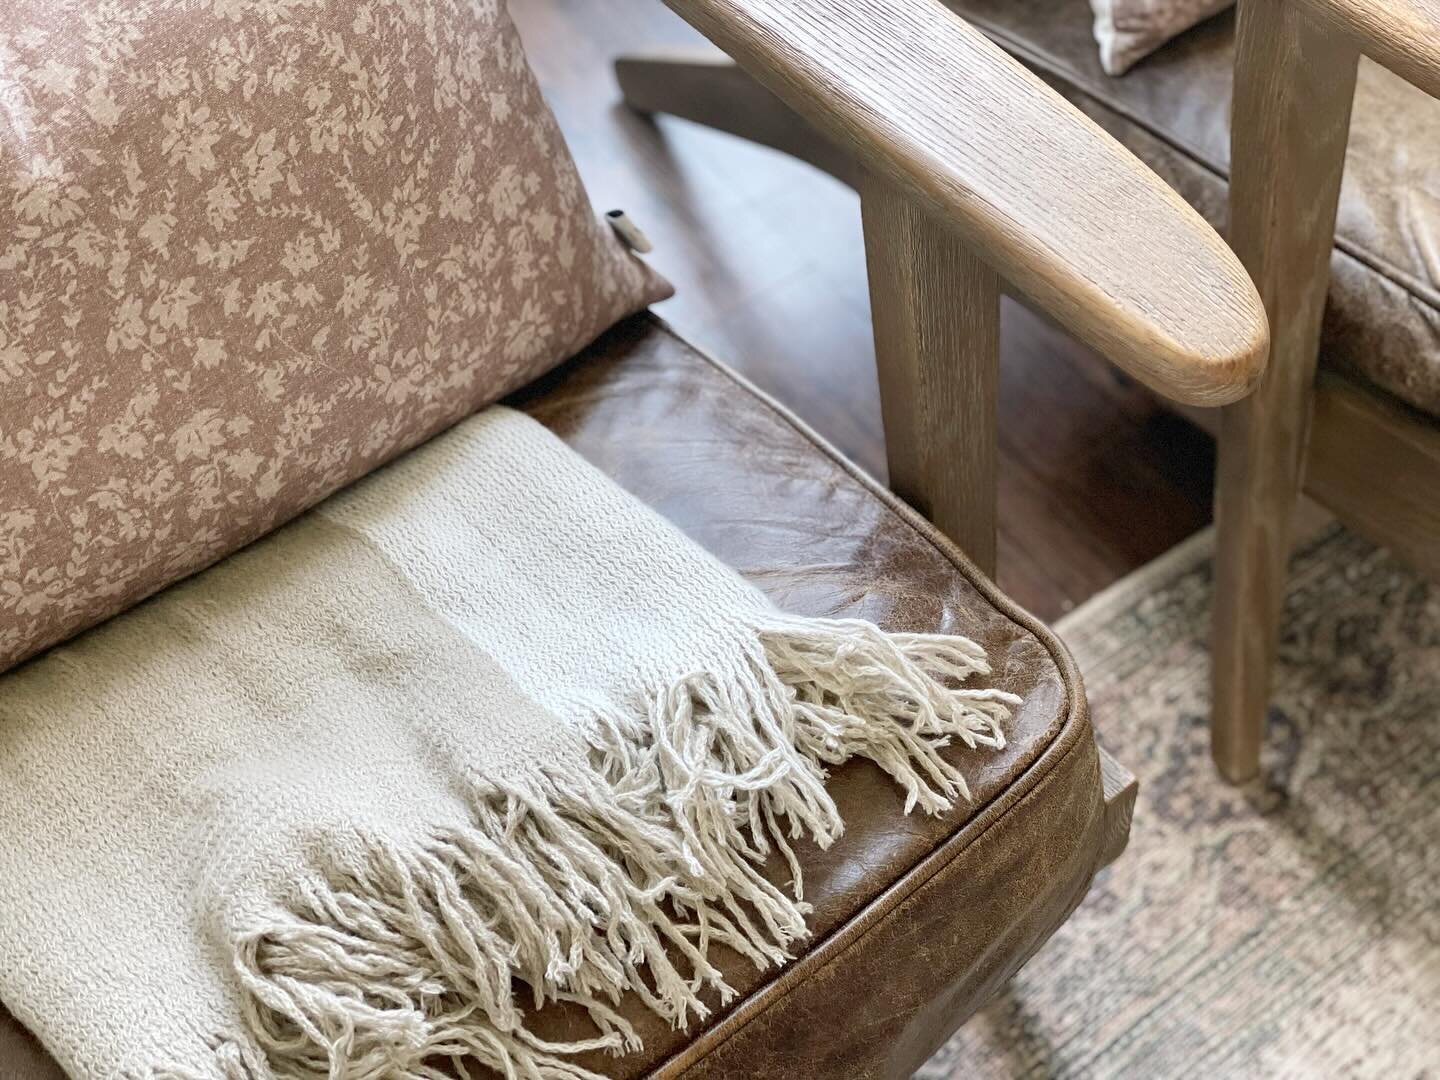 Details cannot be underestimated. My most favorite part of putting a home together is seeing how the colors, pattern and textural elements all play off of each other to create a feeling of warmth, uniqueness, and livability. Even the furry details ma